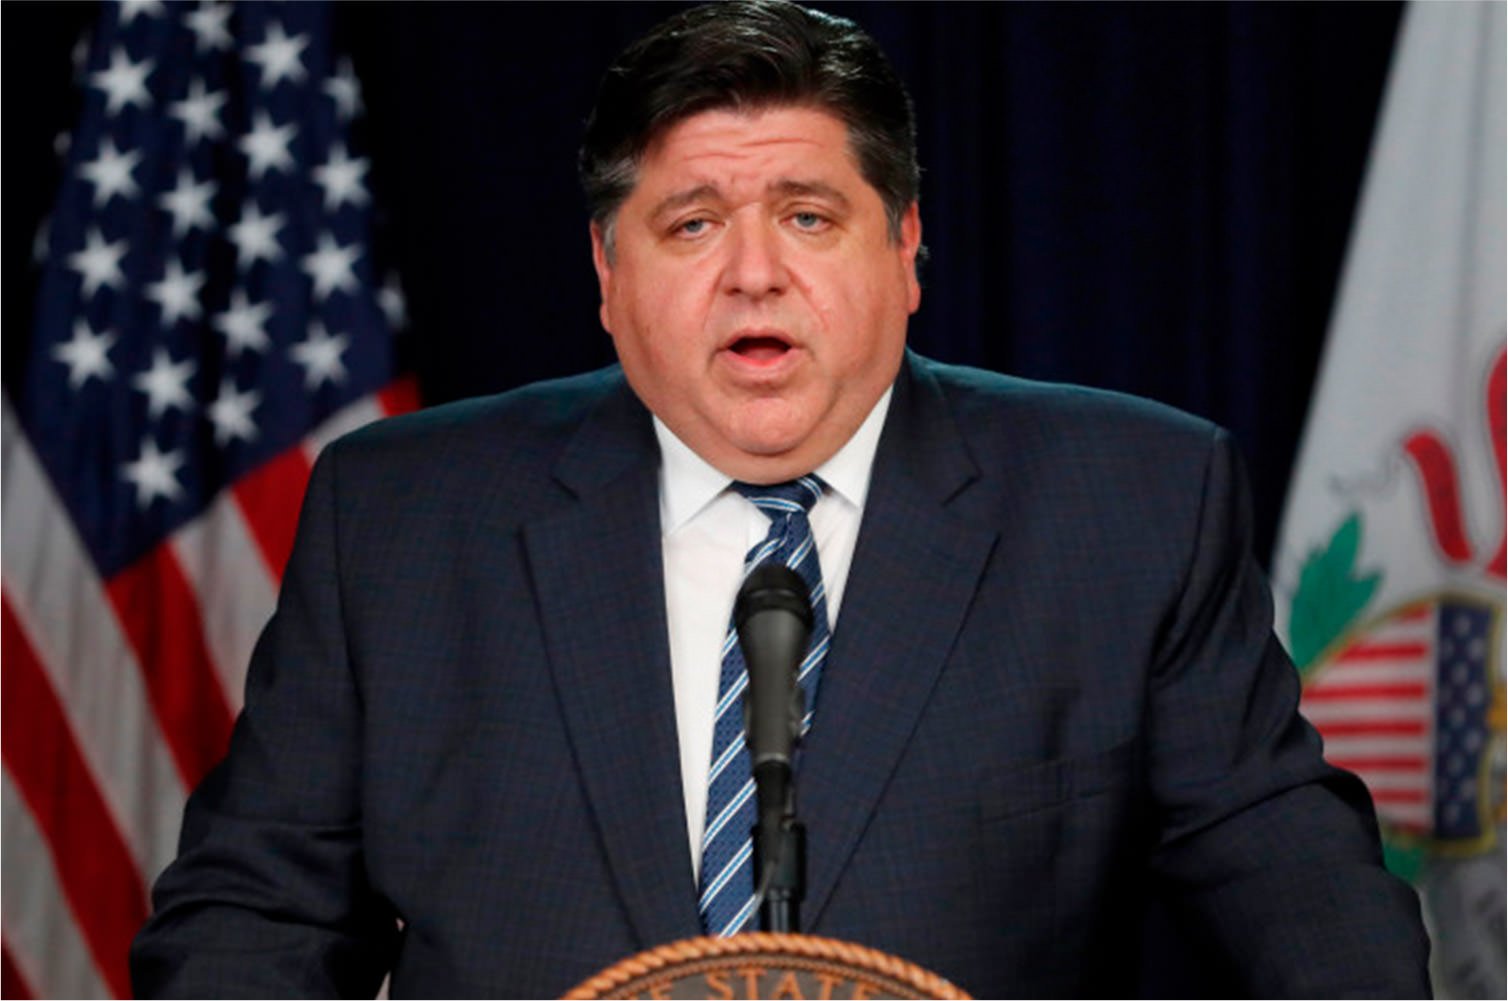 a-threat-or-not-gov-pritzker-can-t-make-up-his-mind-on-anything